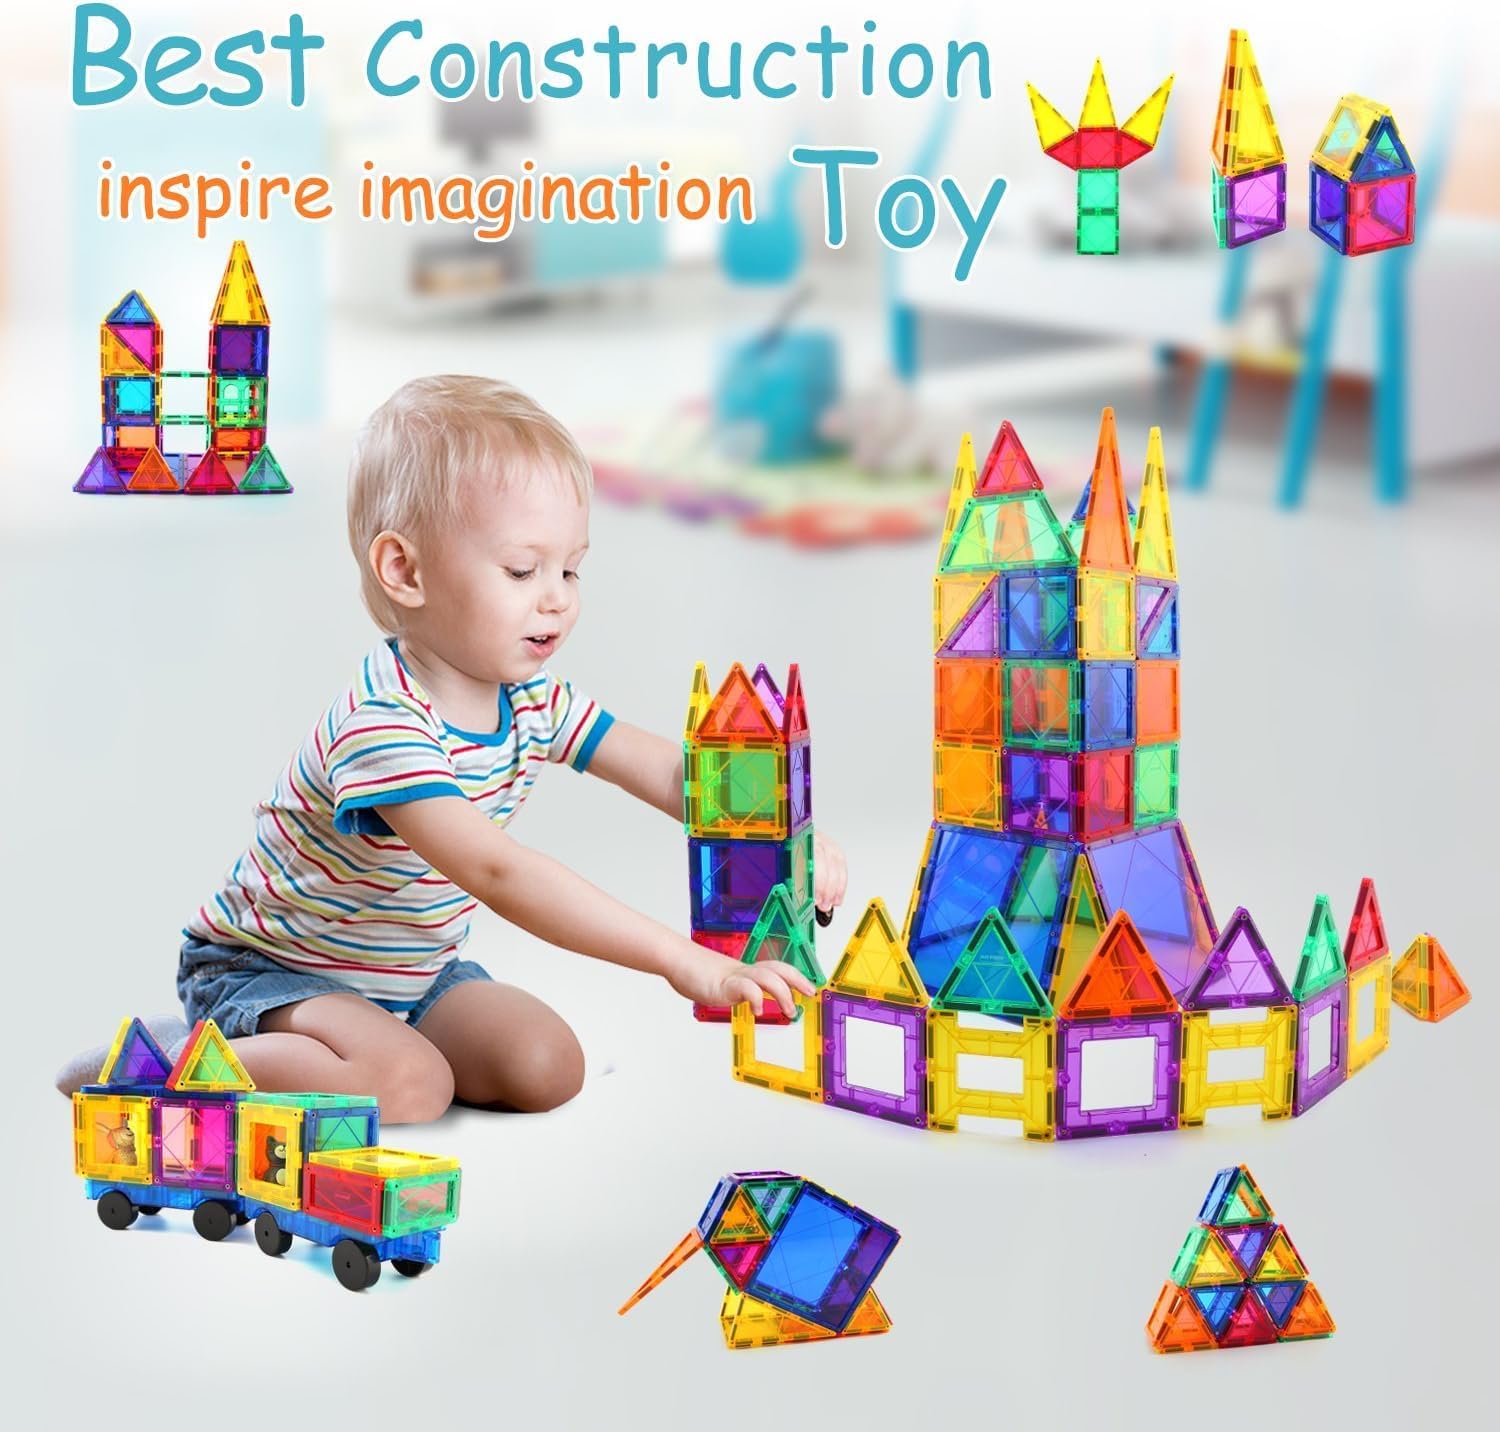 Himms 60 Piece Magnetic Tile Set -3D Magnet Building Blocks - High quality educational toys suitable for your child - Upgraded version with powerful magnets - Creativity, imagination, inspiration